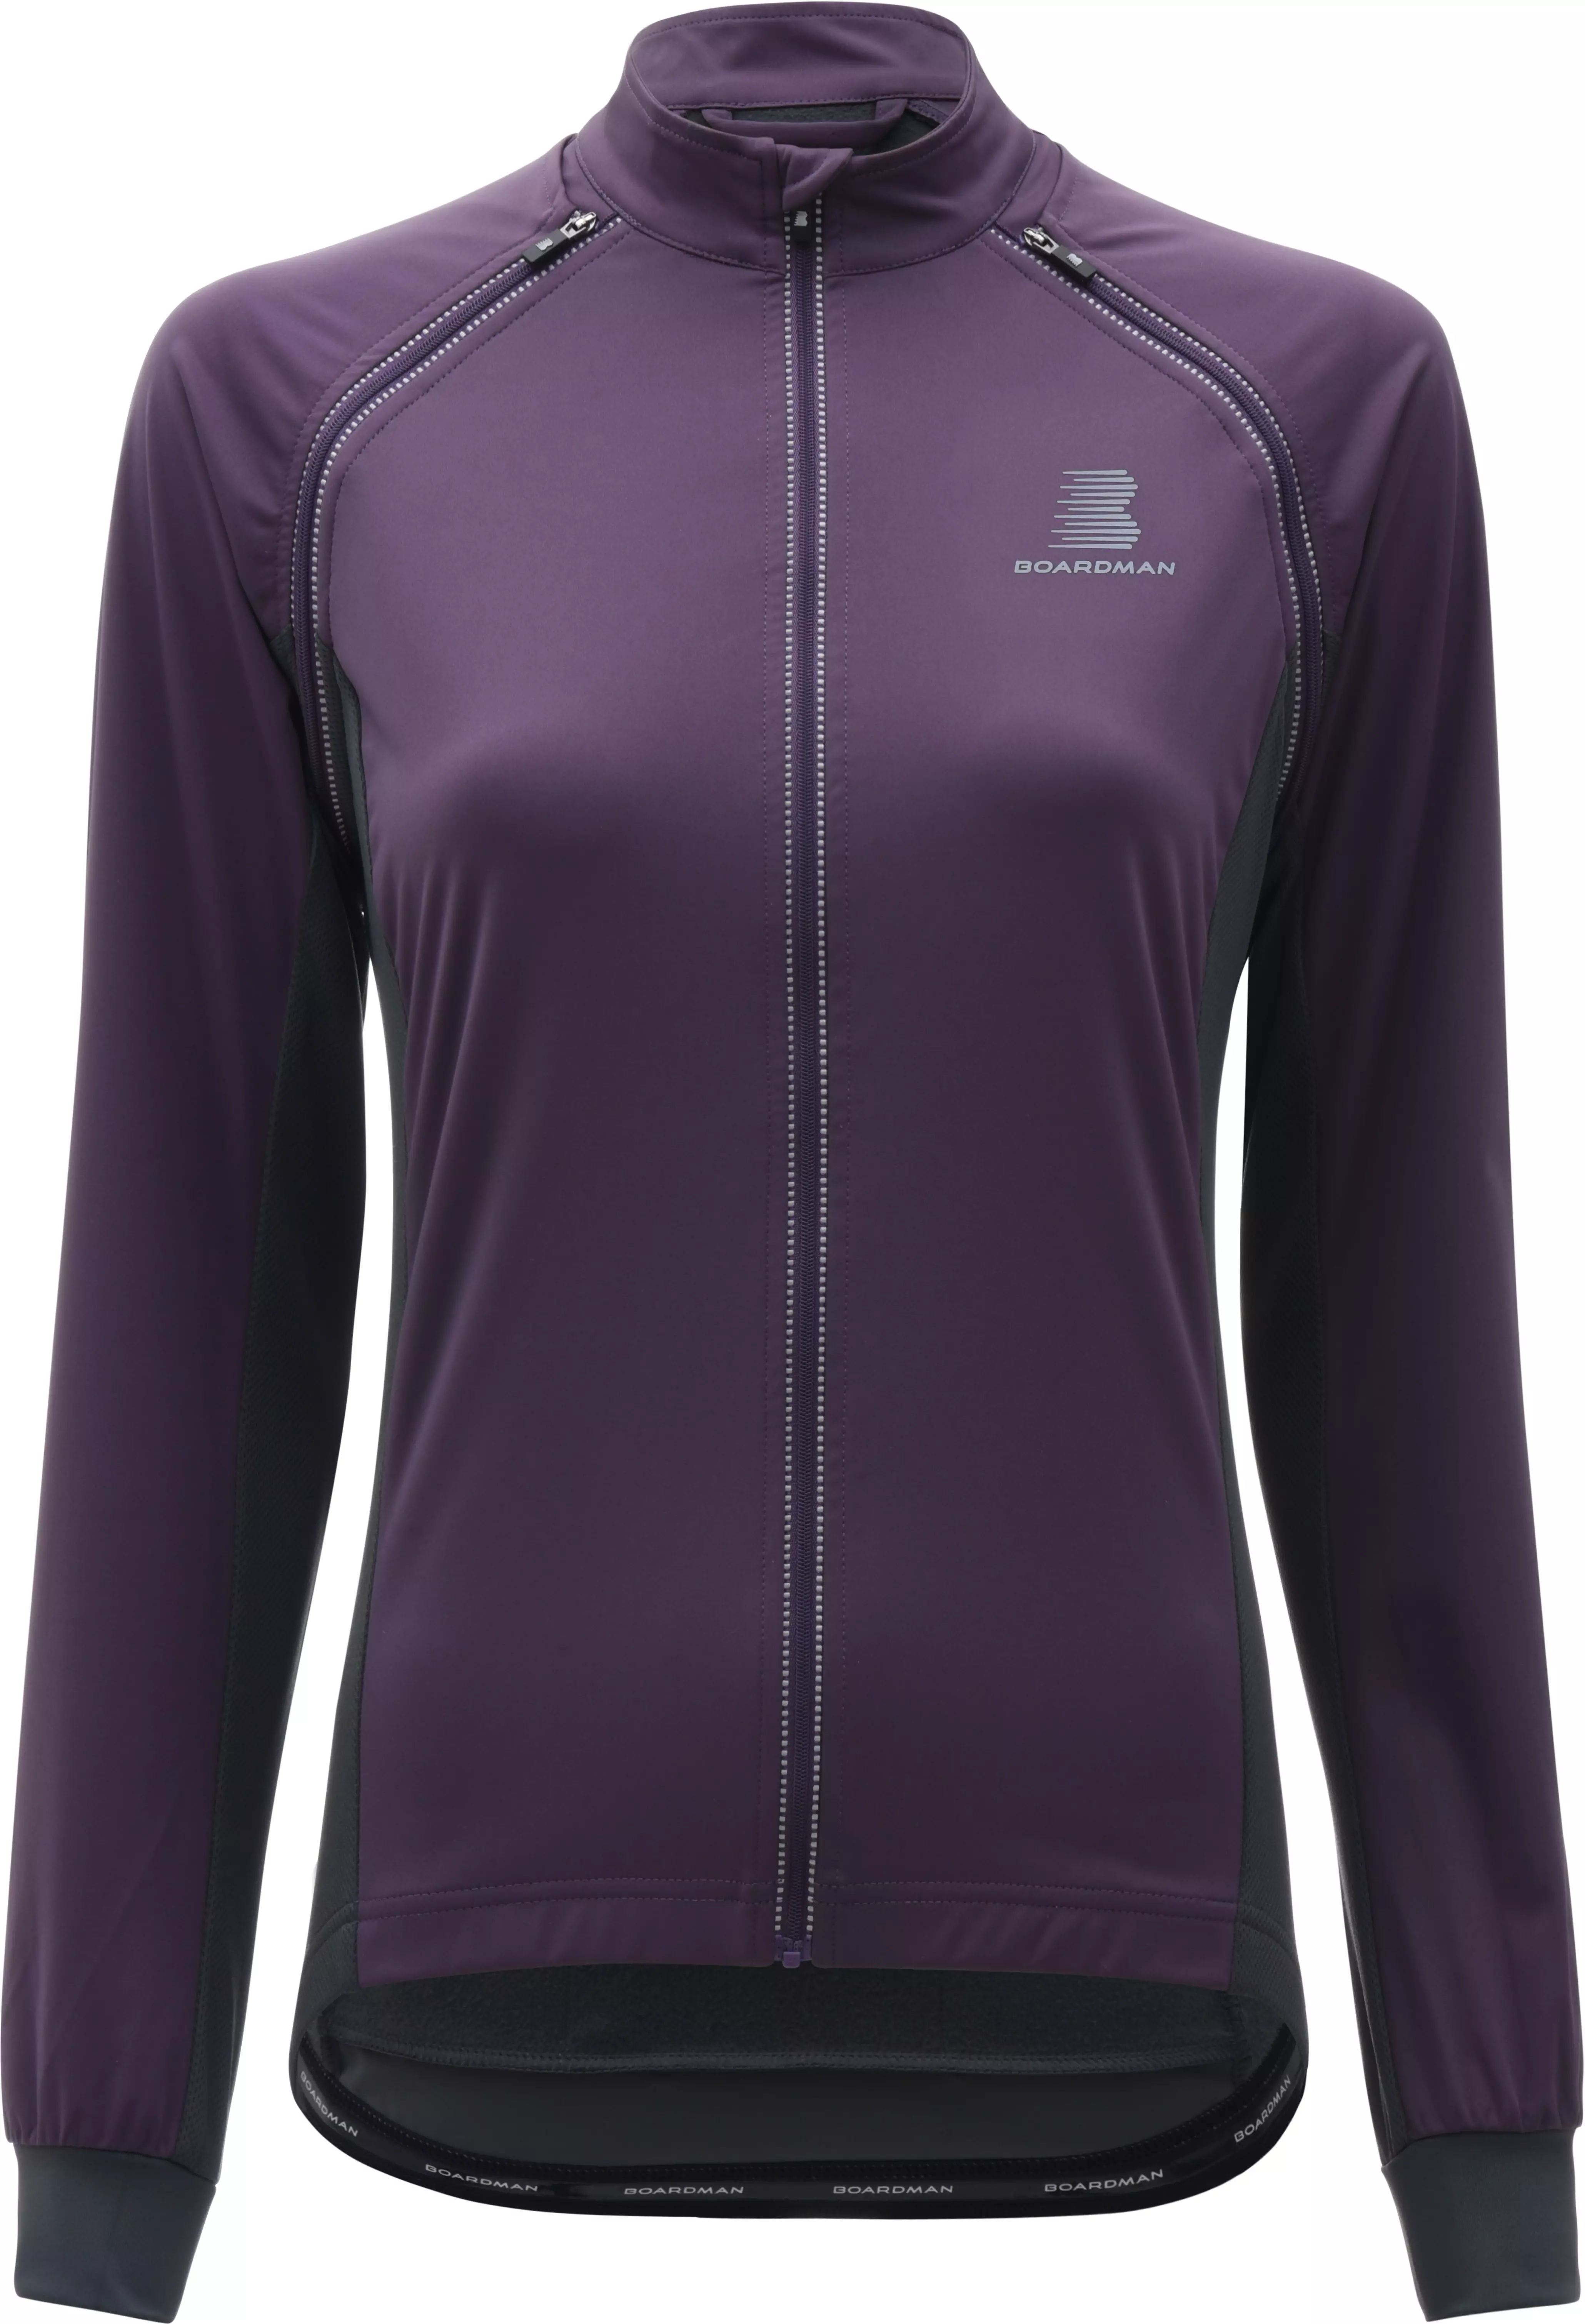 women's cycling jacket with removable sleeves